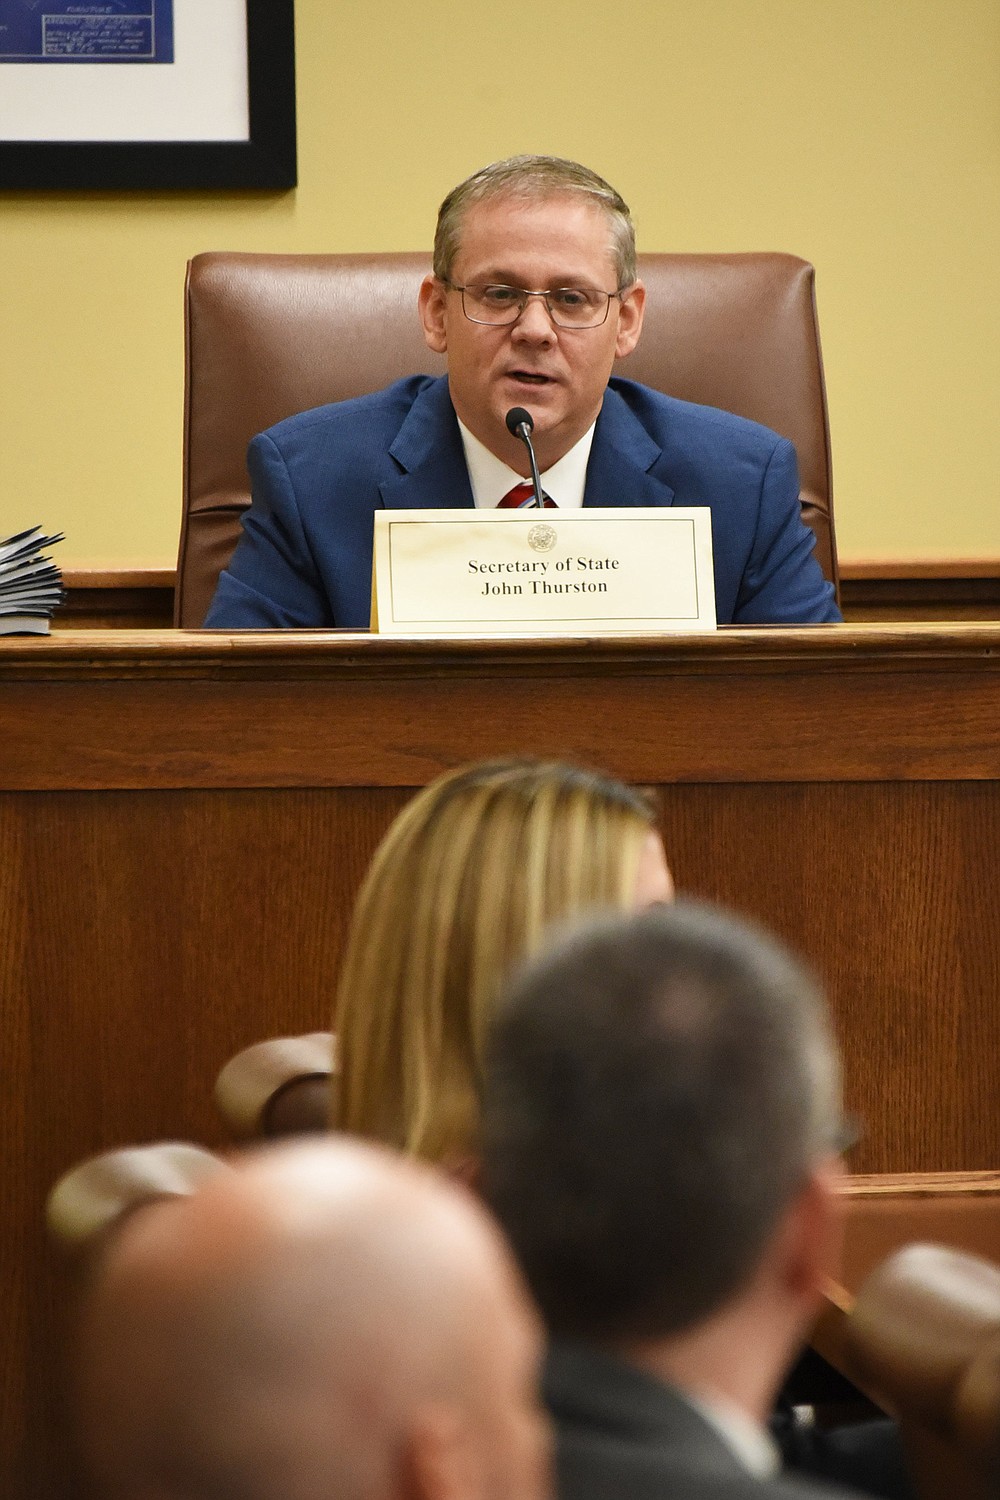 Secretary of State John Thurston speaks during the Arkansas Board of Apportionment meeting Friday at the state Capitol. The board consists of Gov. Asa Hutchinson, Attorney General Leslie Rutledge and Thurston.
(Arkansas Democrat-Gazette/Staci Vandagriff)